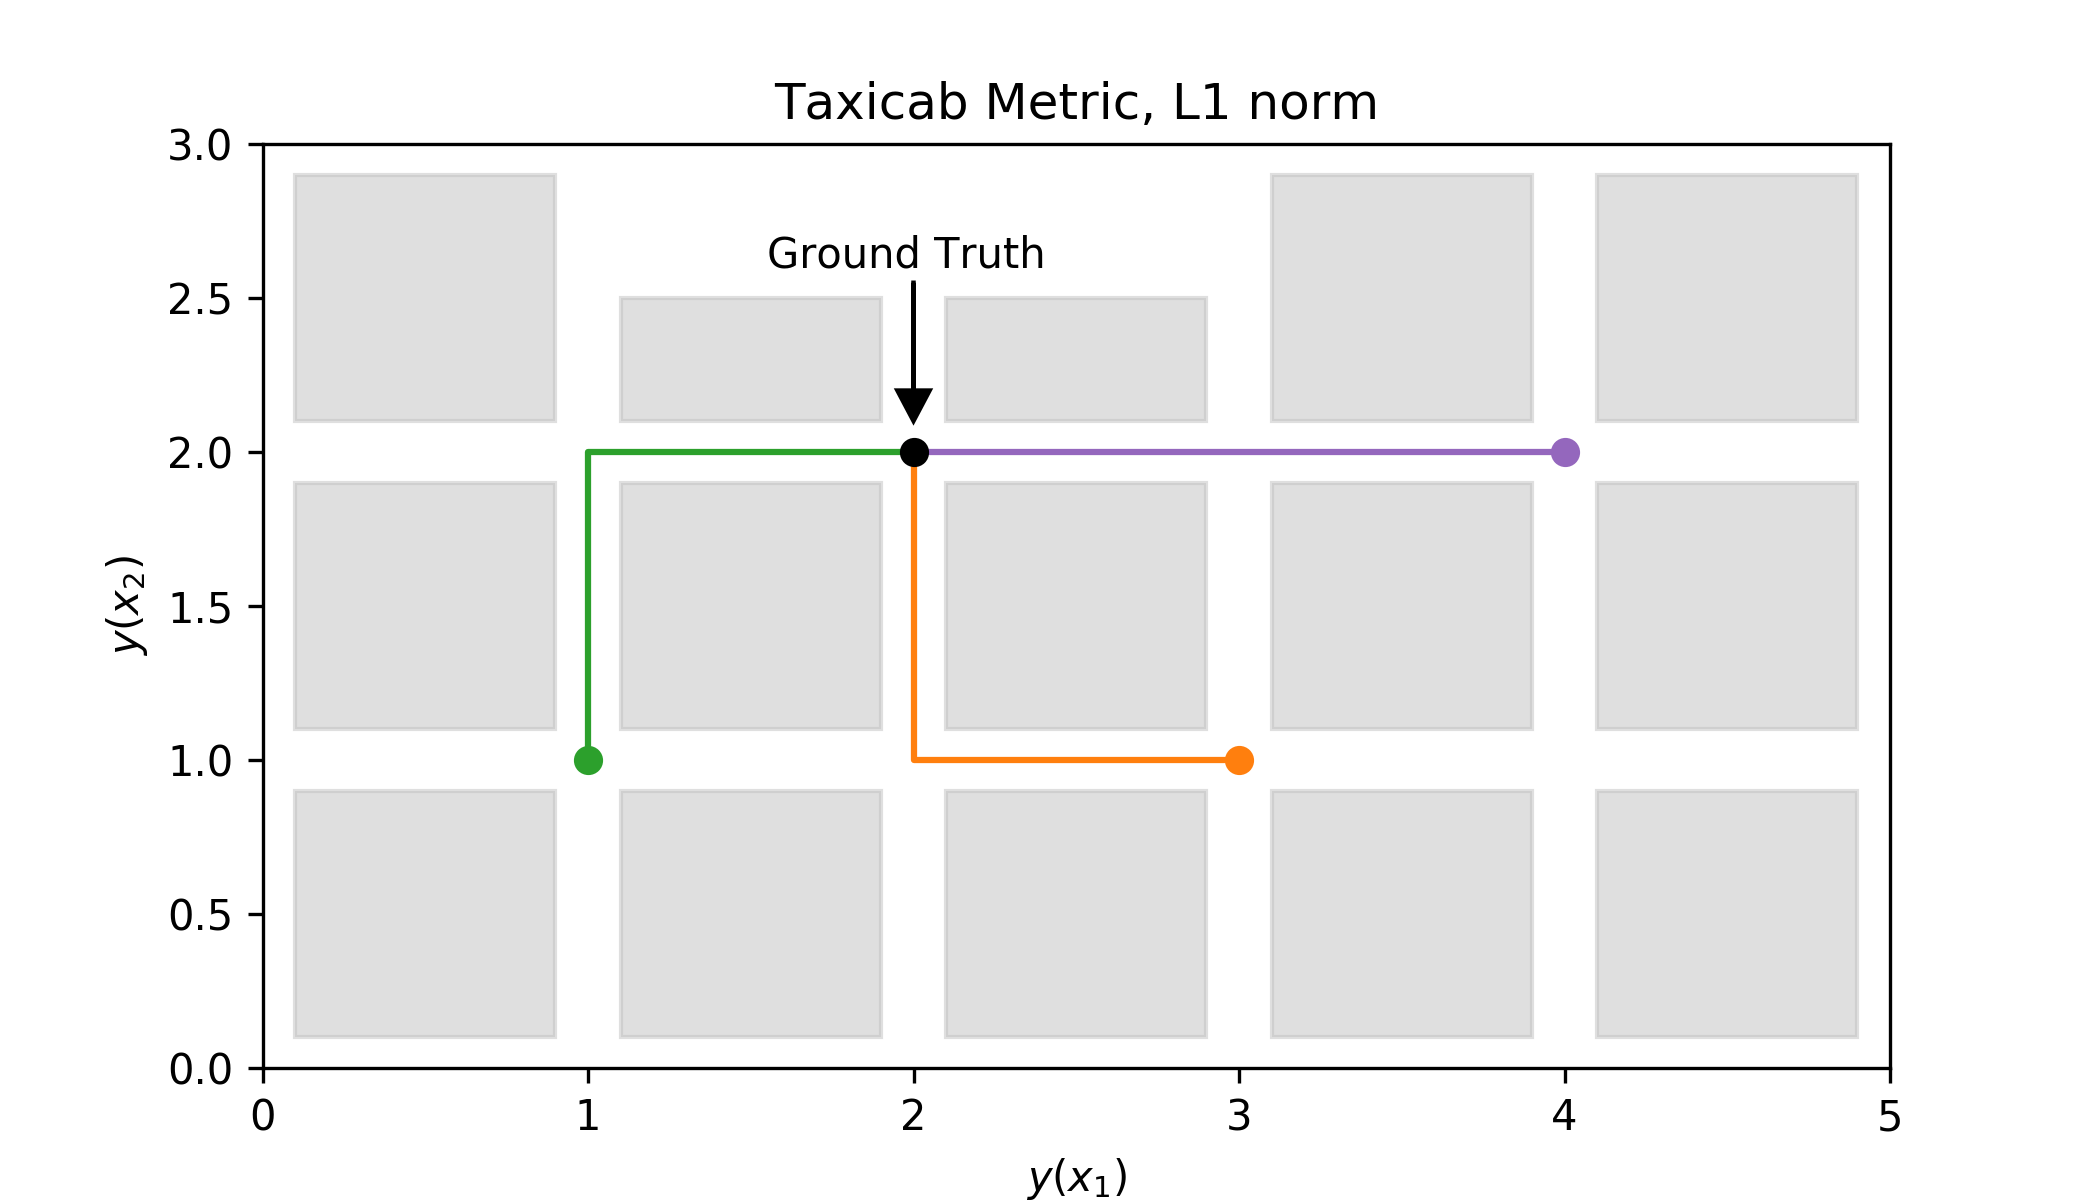 Application of the taxicab metric to measure distance between the ground truth and the models